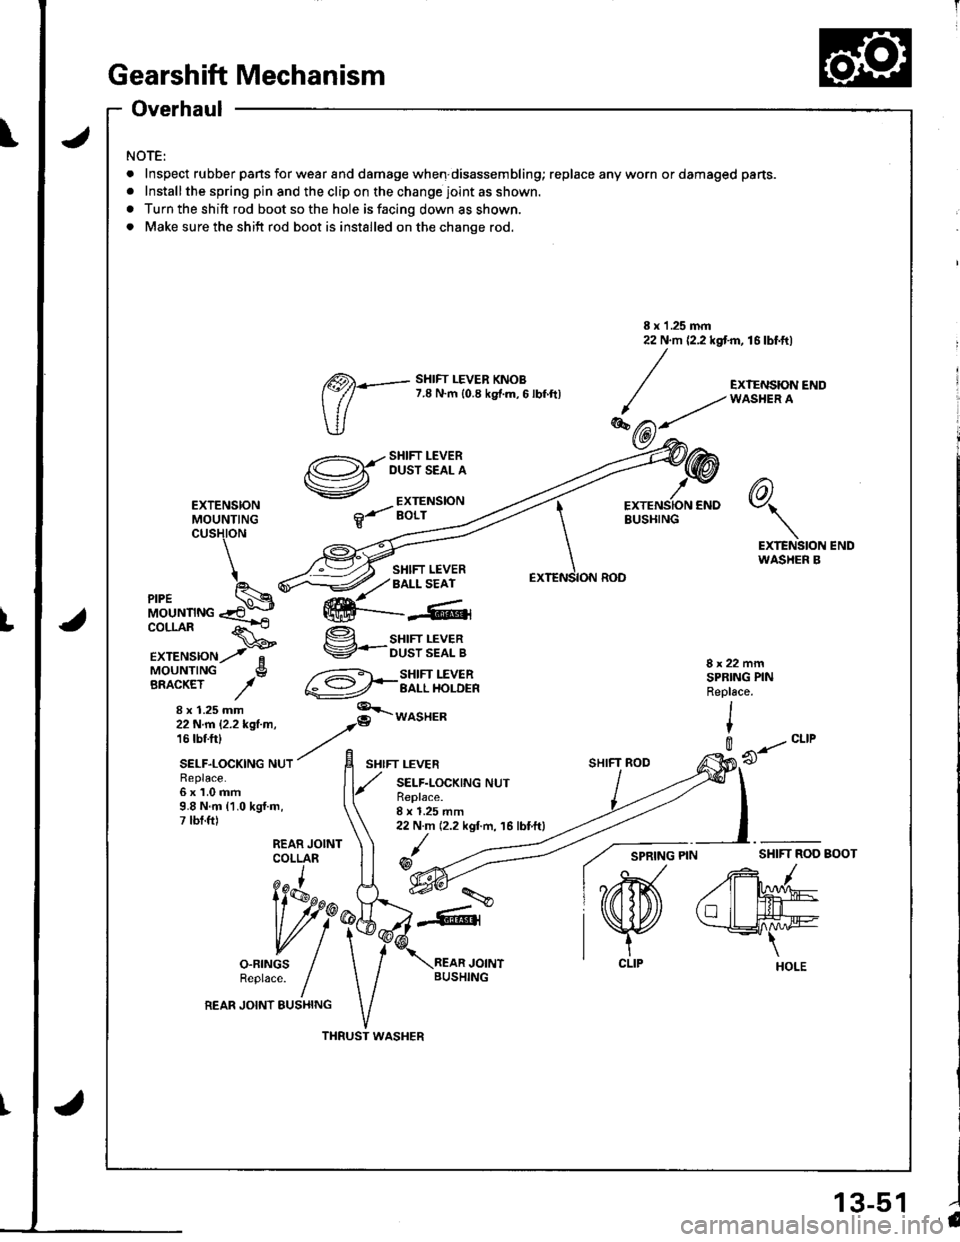 HONDA INTEGRA 1998 4.G Workshop Manual Gearshift Mechanism
Overhaul
NOTE:
.Inspe(
.lnstall
a Turn t
. Make
Inspect rubber pans for wear and damage when disassembling; replace any worn or damaged pans.
Installthe spring pin and the clip on 